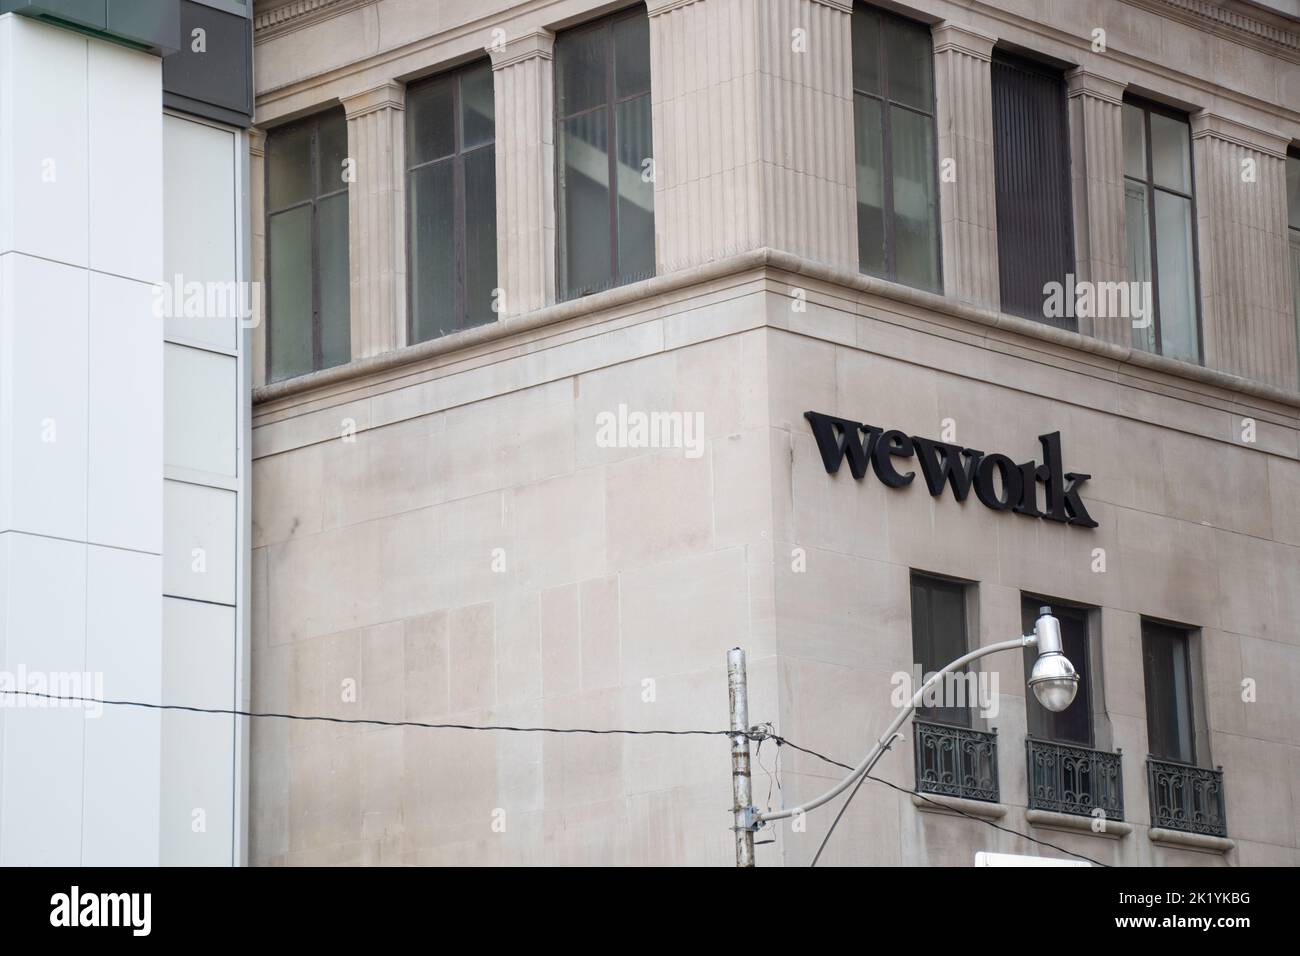 The WeWork logo on side of an office building in downtown Toronto; WeWork is a provider of coworking spaces. Stock Photo